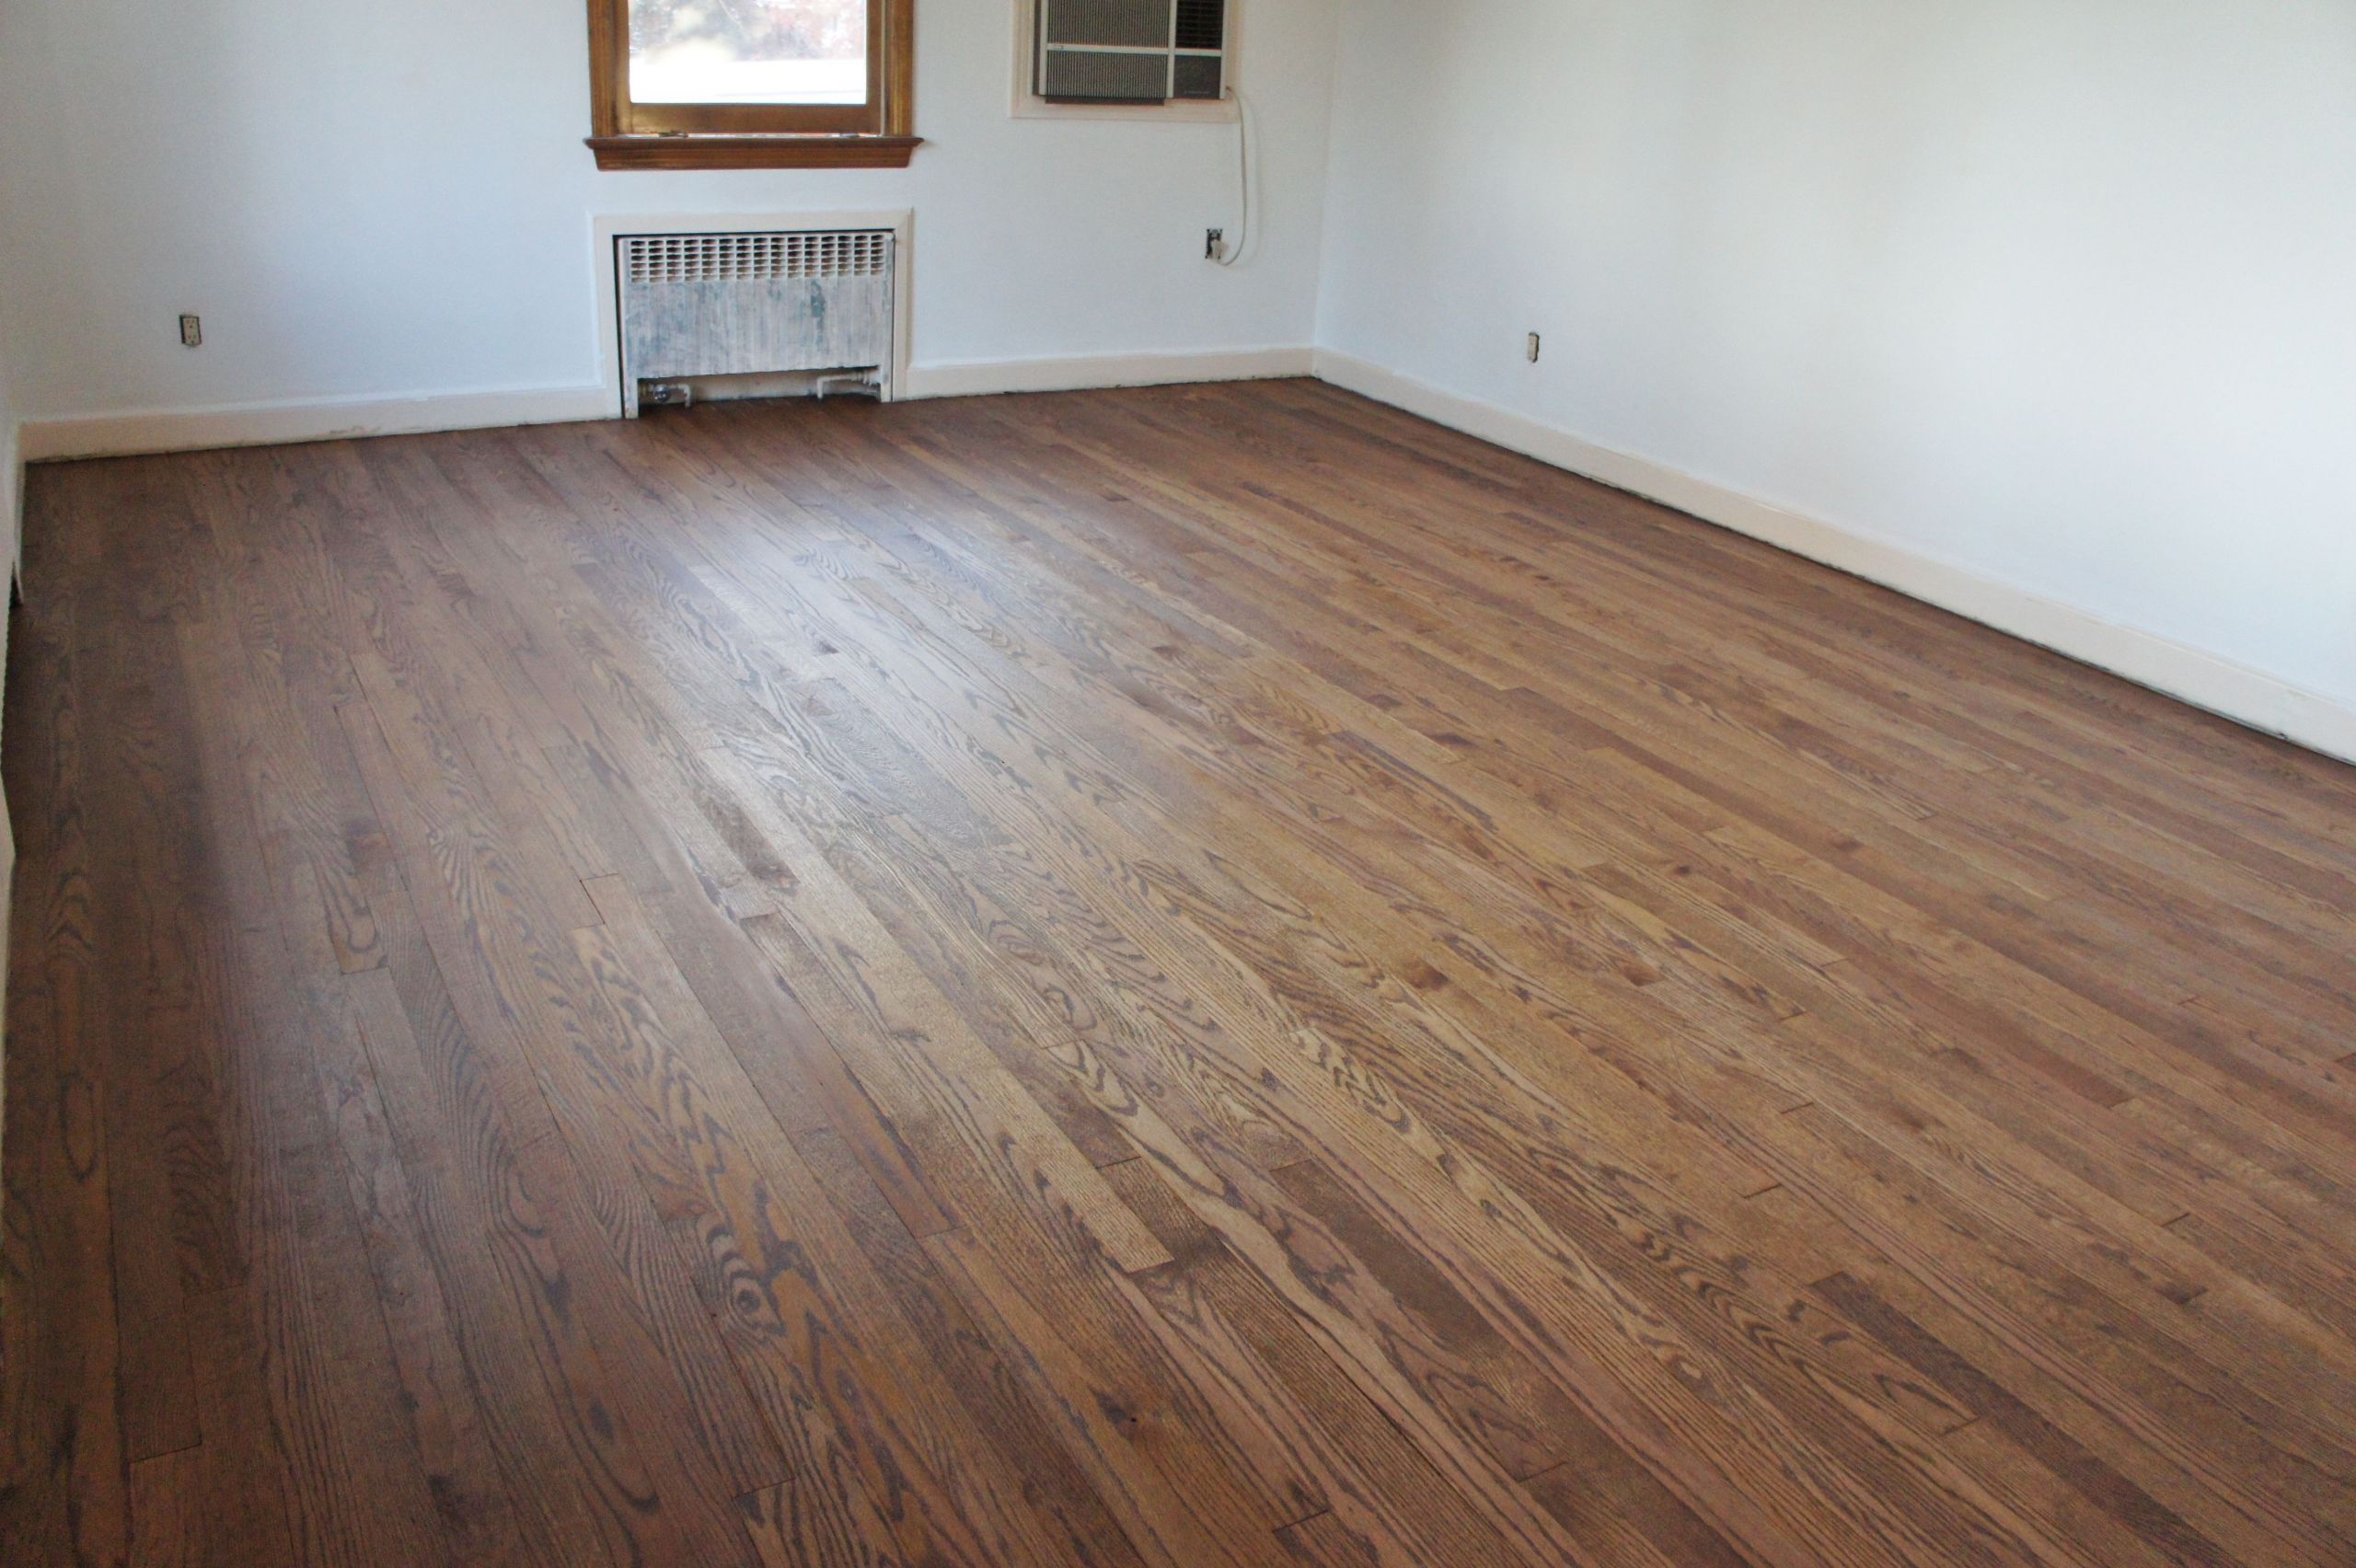 Refinishing Hardwood Floors Cost DIY
 How Much Does It Cost To Refinish Wood Floors Yourself